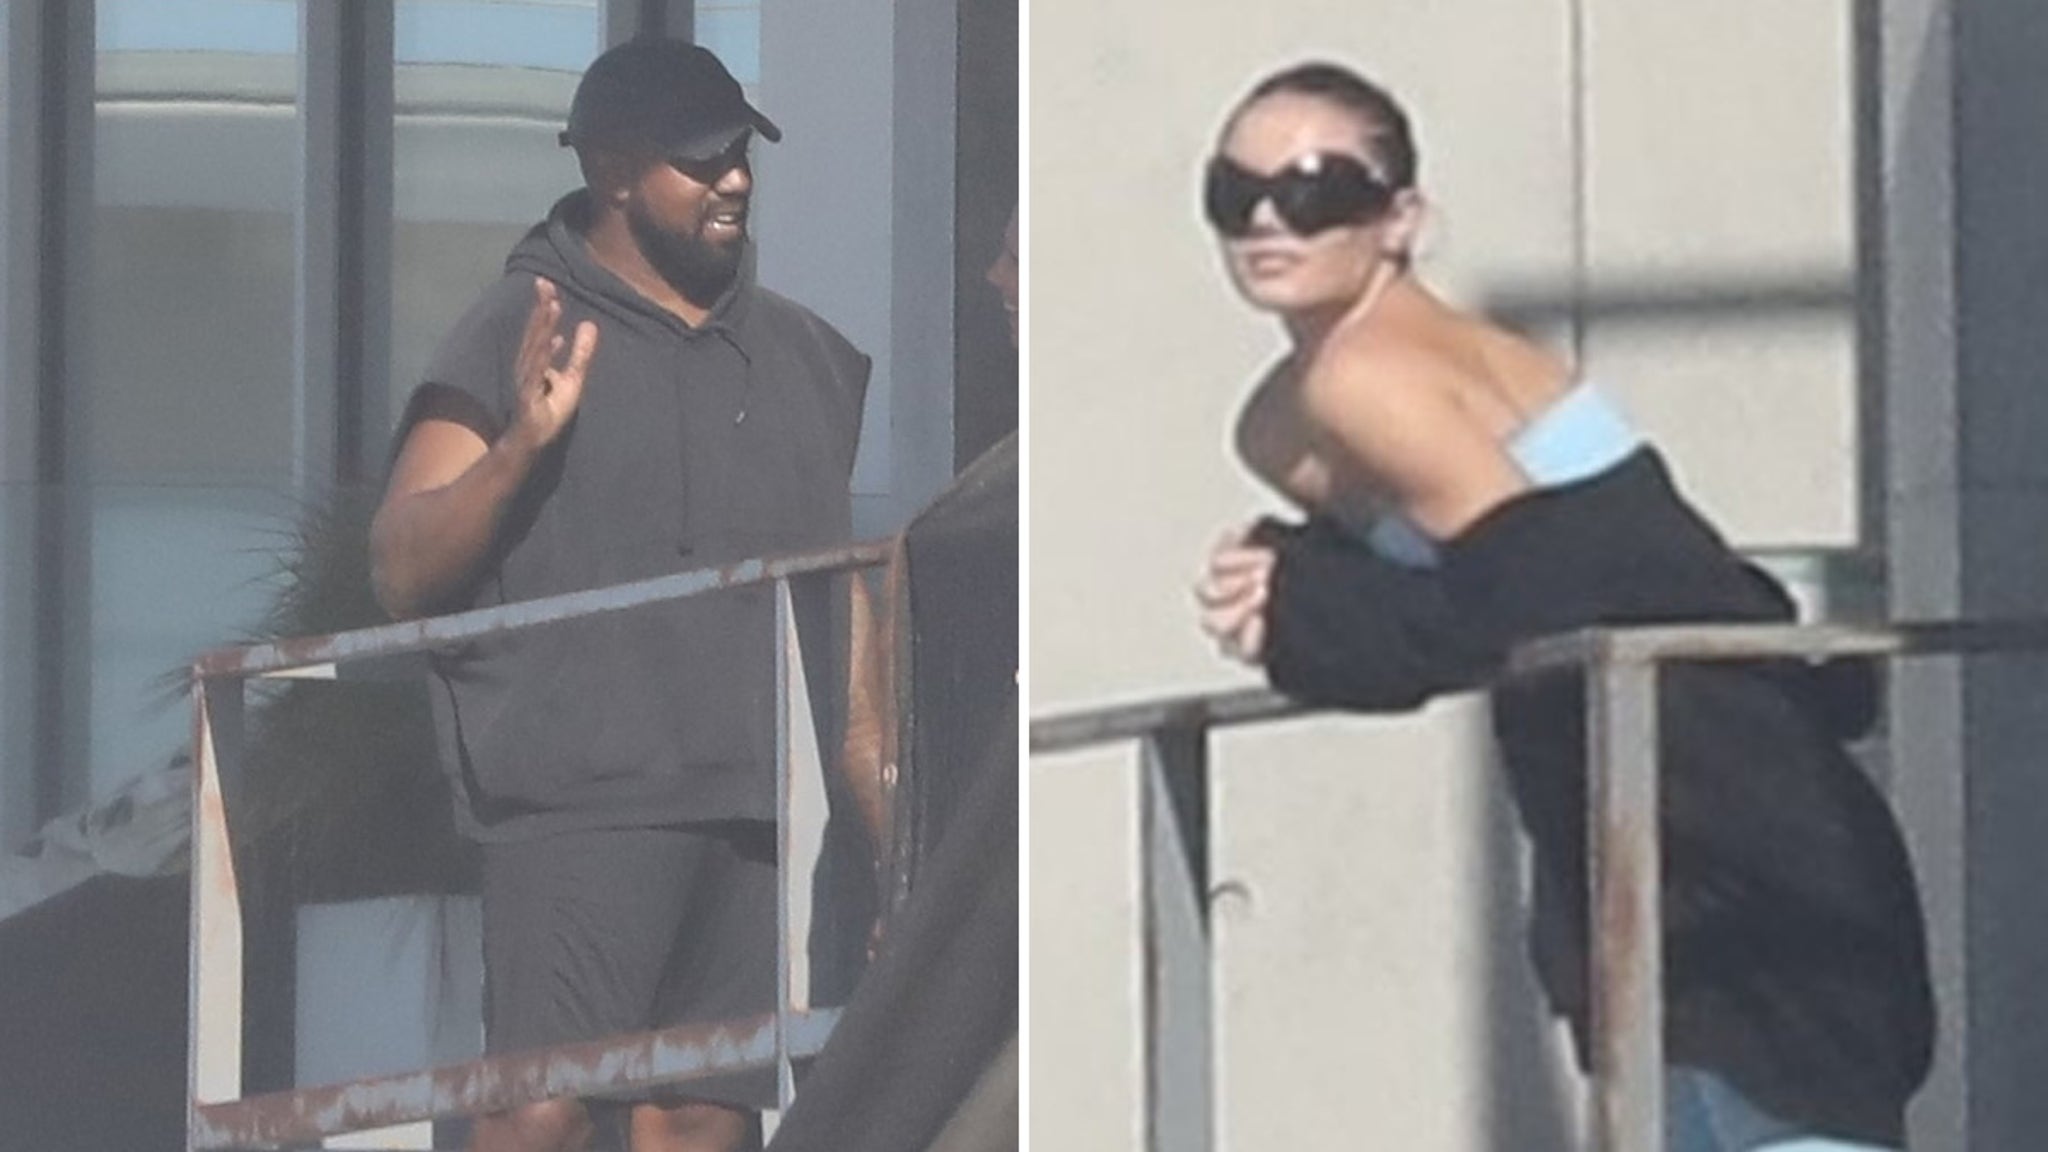 Kanye West Visits Malibu Home with Mystery Woman #KanyeWest